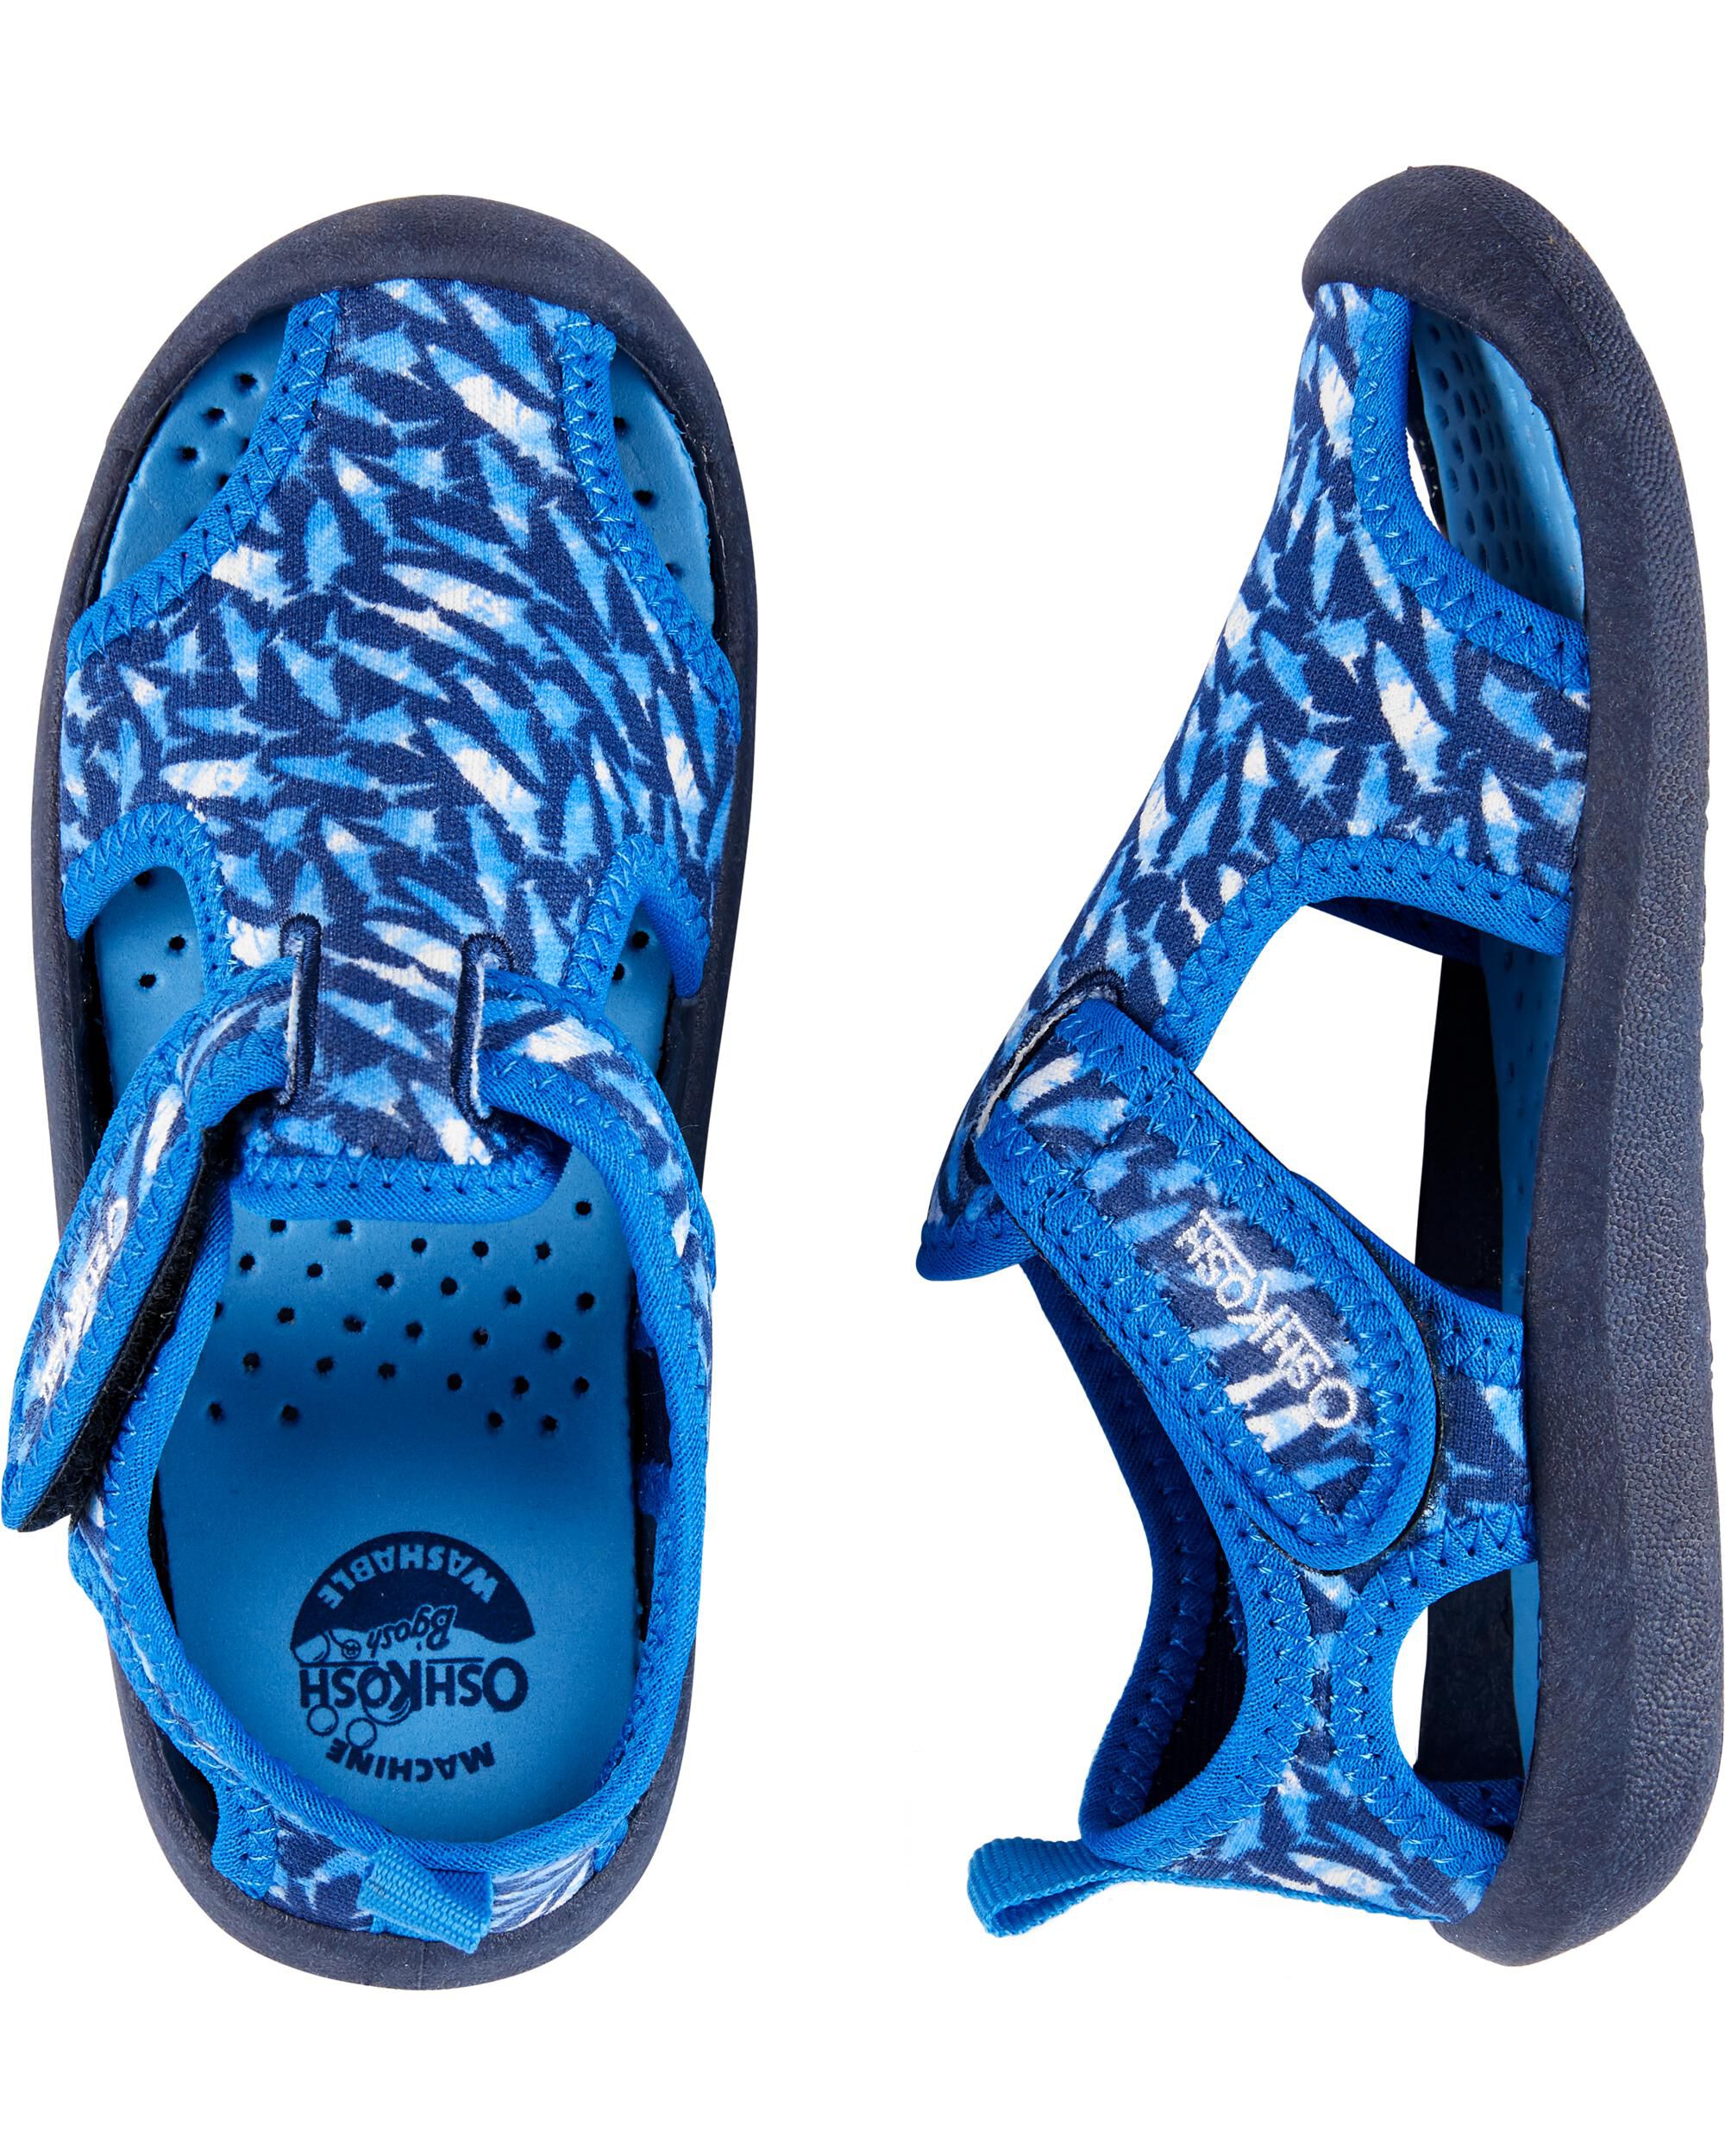 Shop All Kid Boy: Water Shoes | Carter 